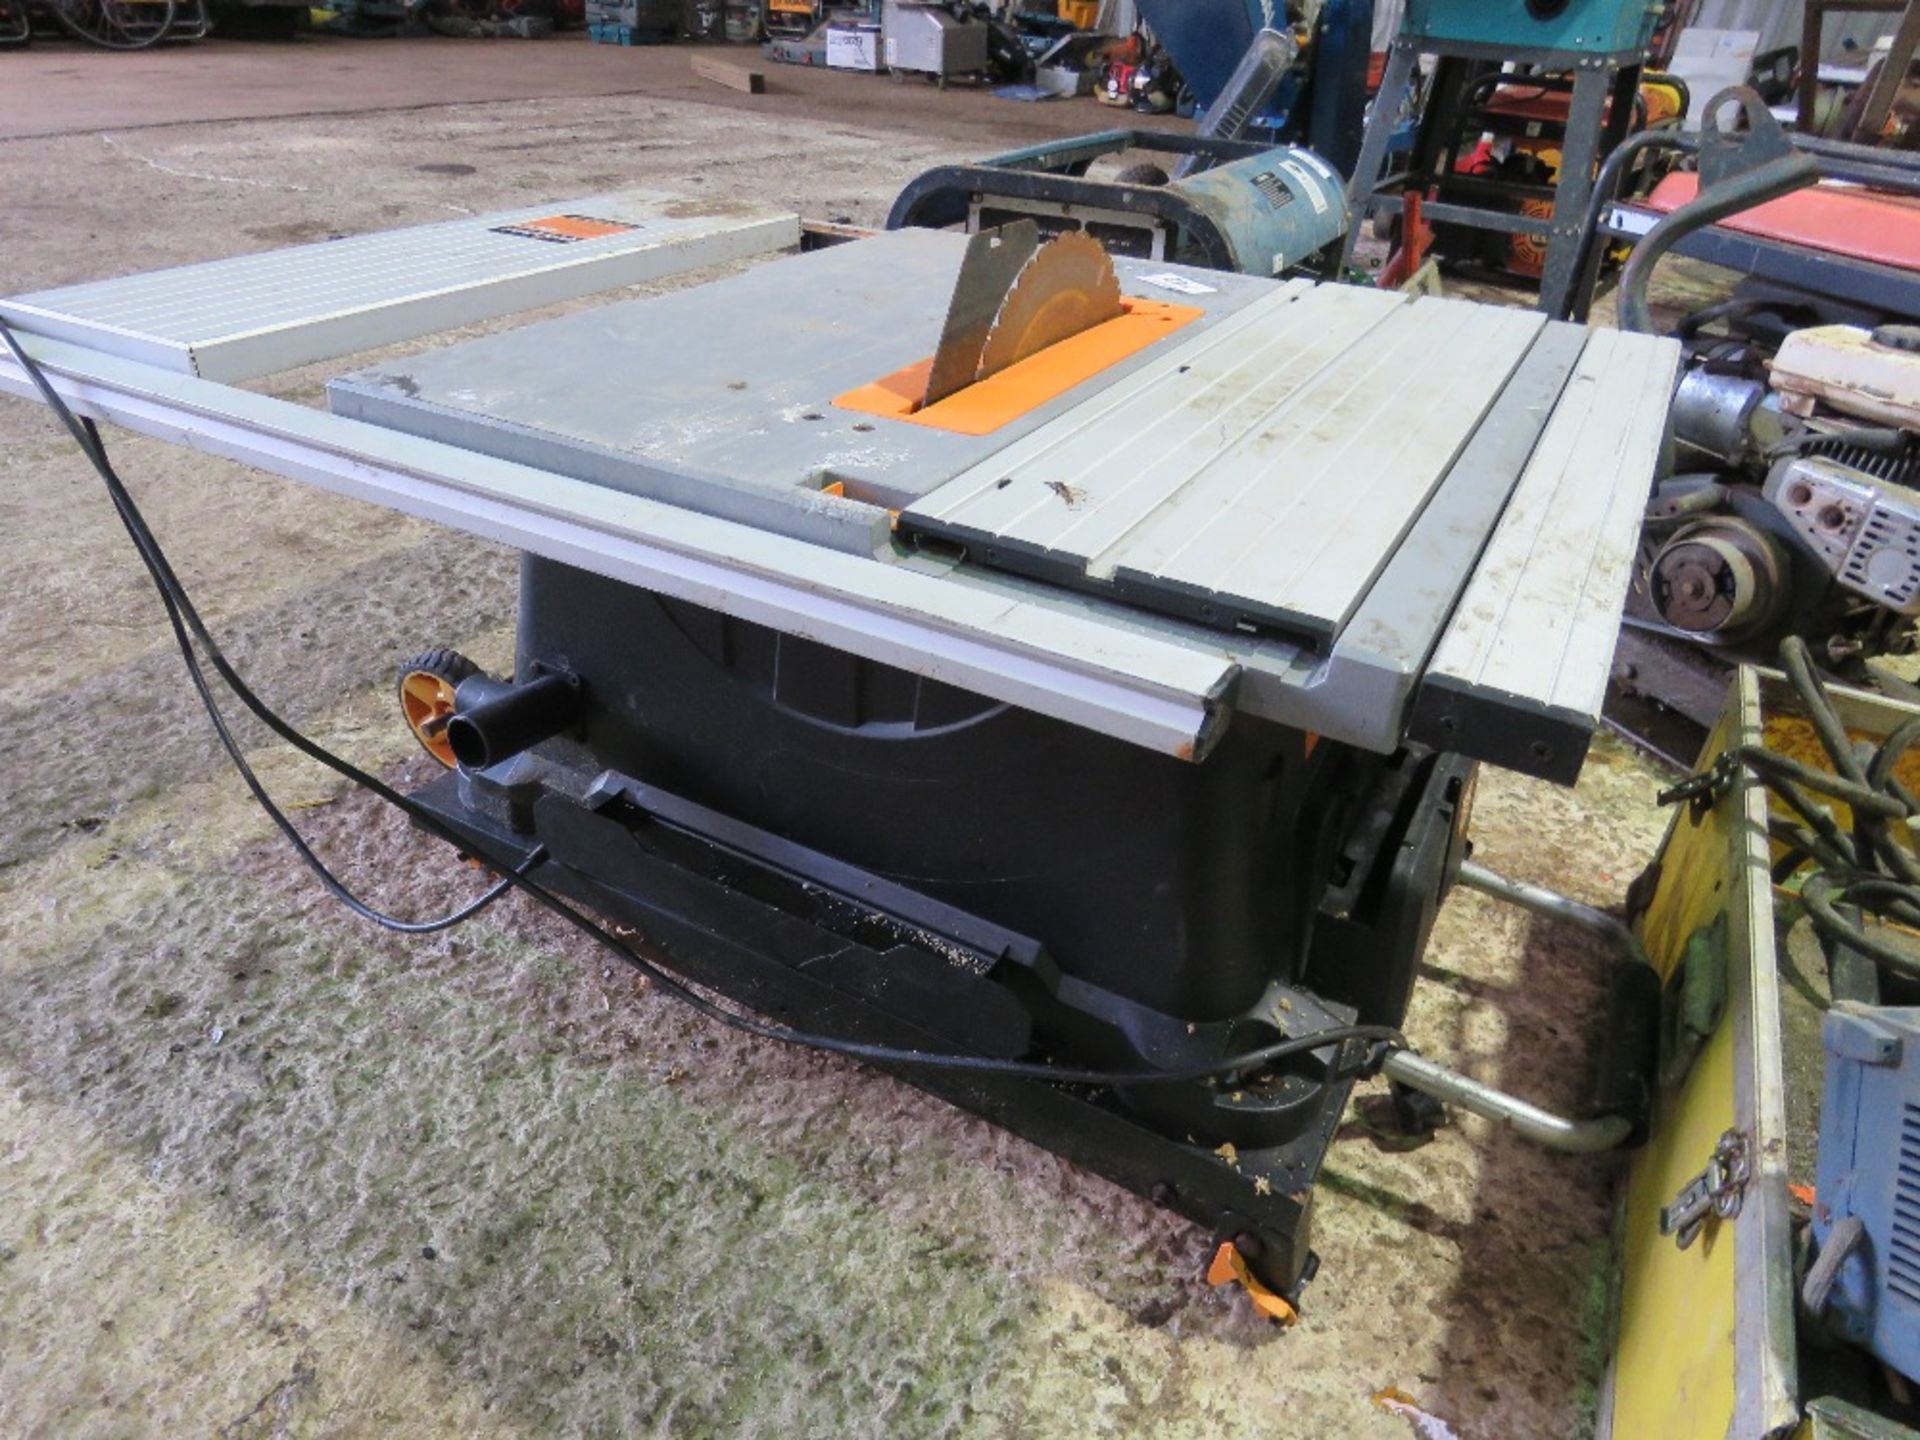 EVOLUTION 240VOLT WOOD CUTTING SAWBENCH....SOURCED FROM DEPOT CLOSURE.